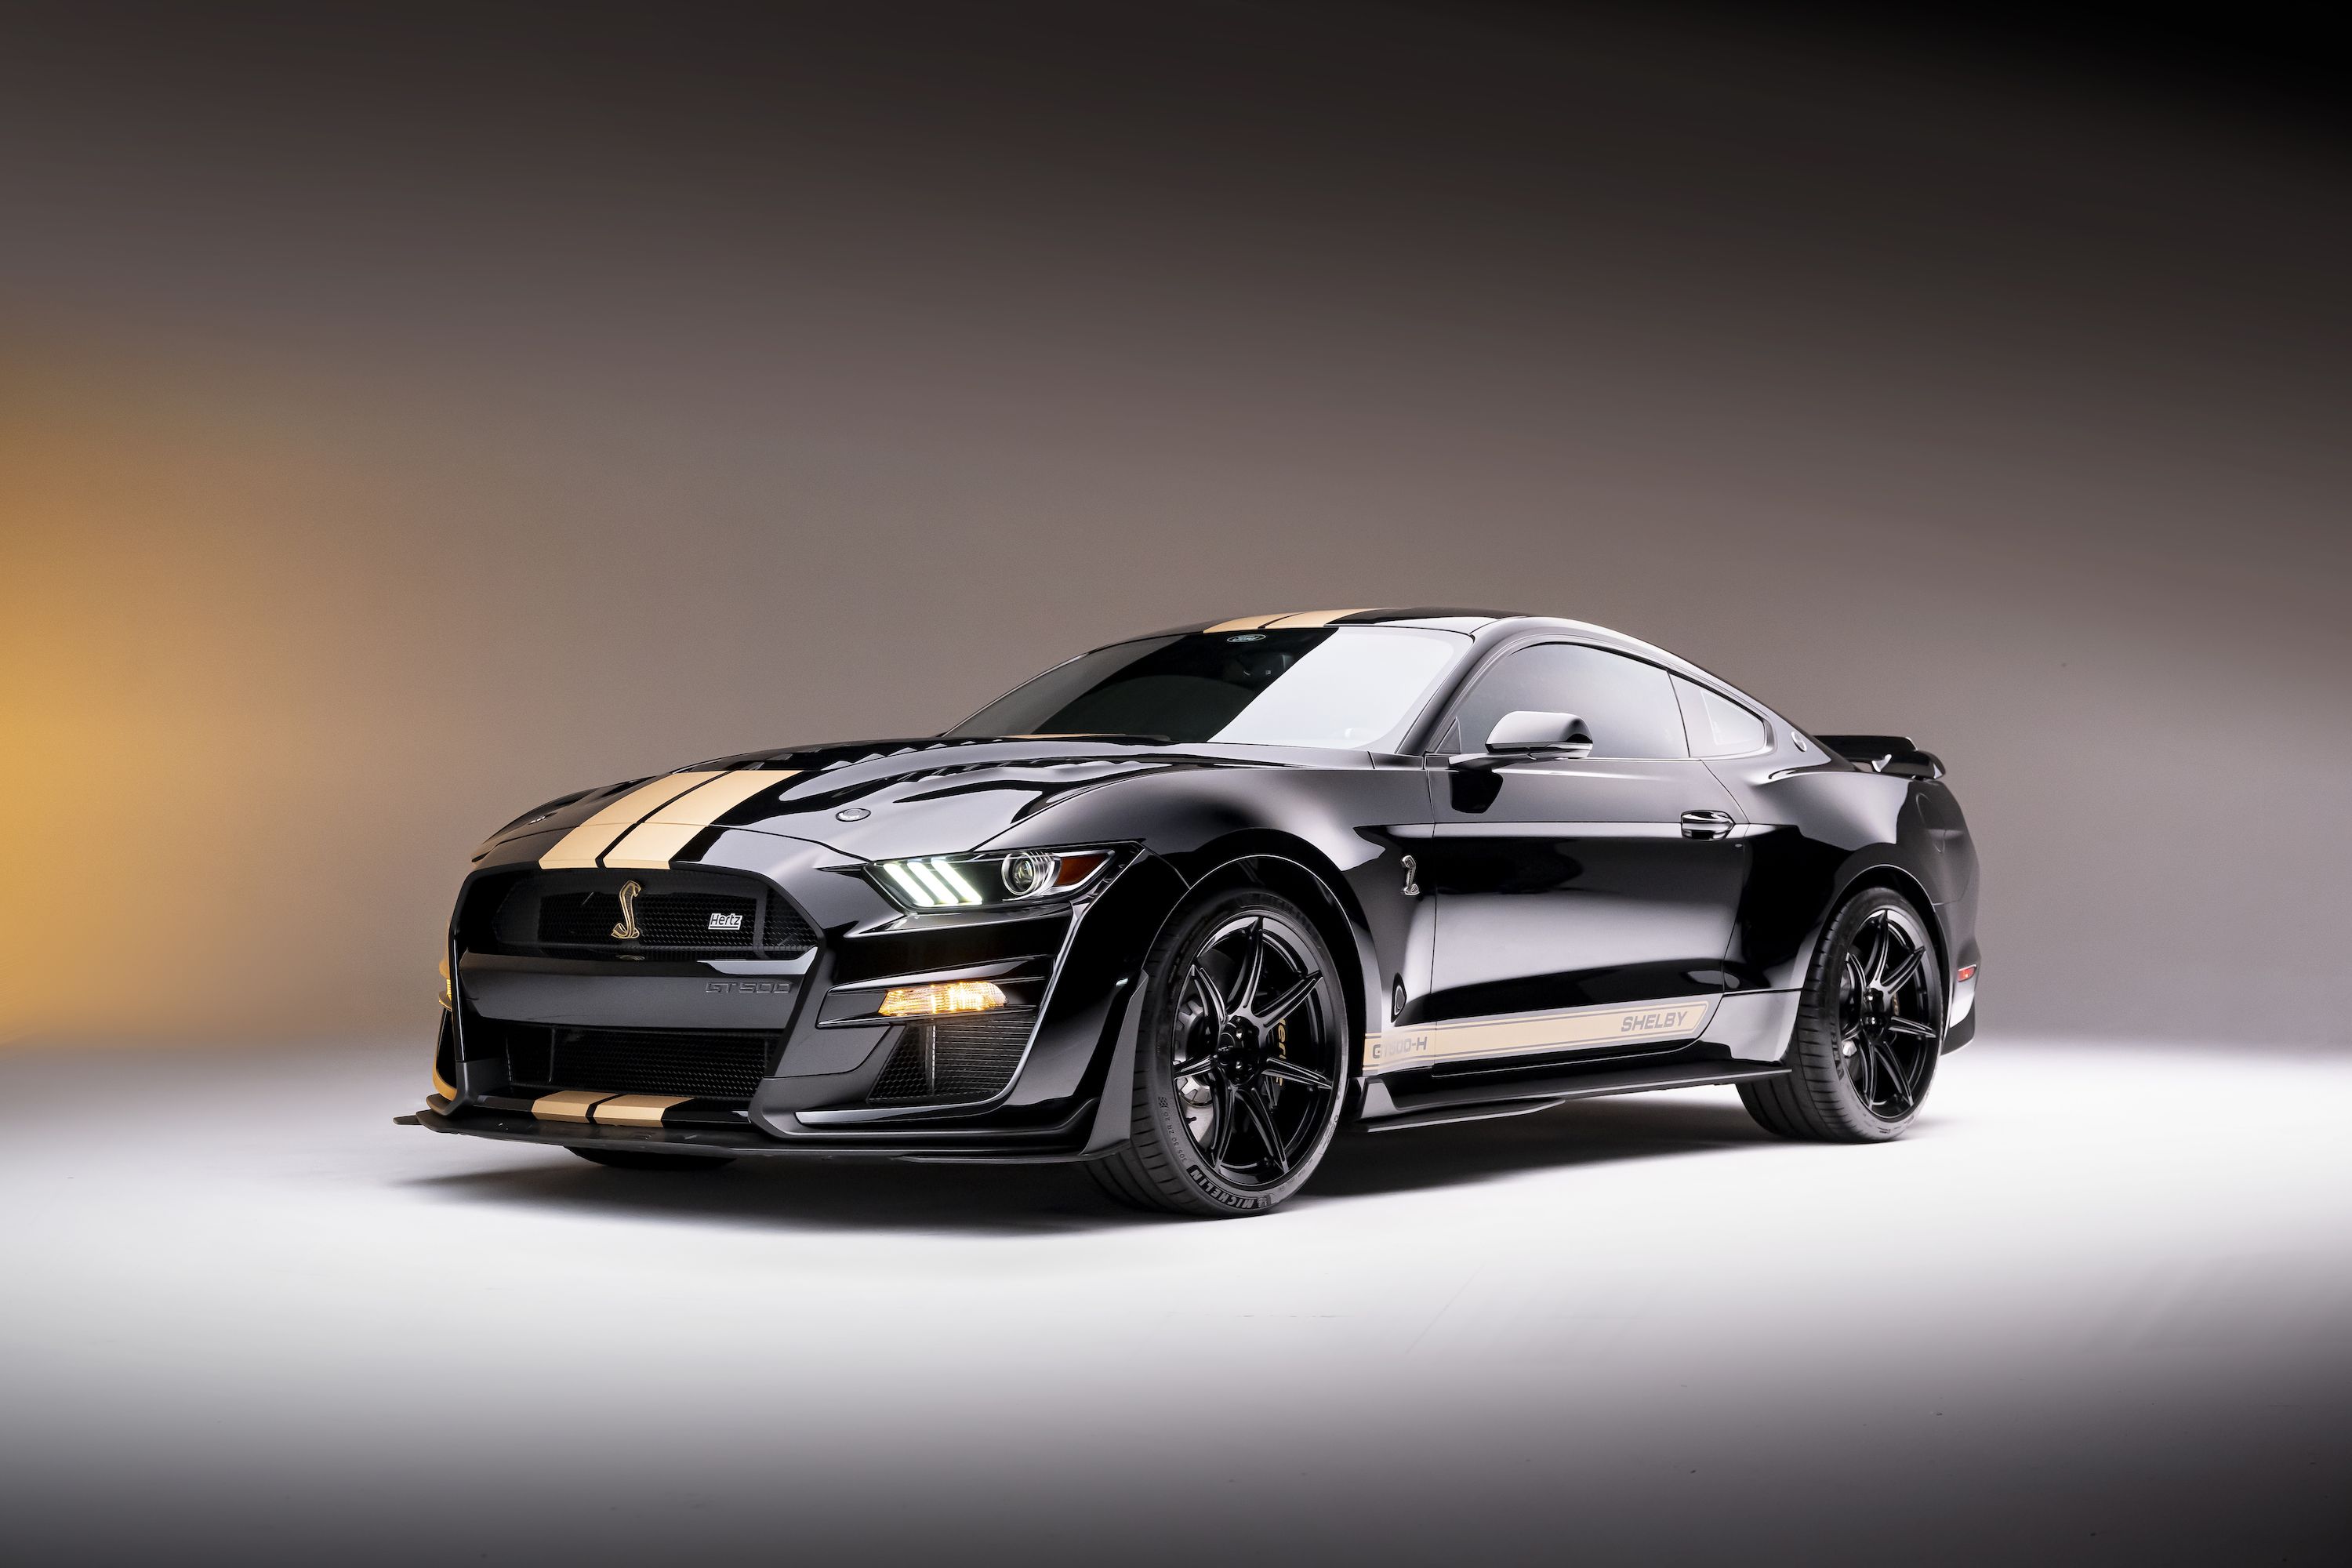 Shelby Cobra Gt500 King Of The Road Wallpapers